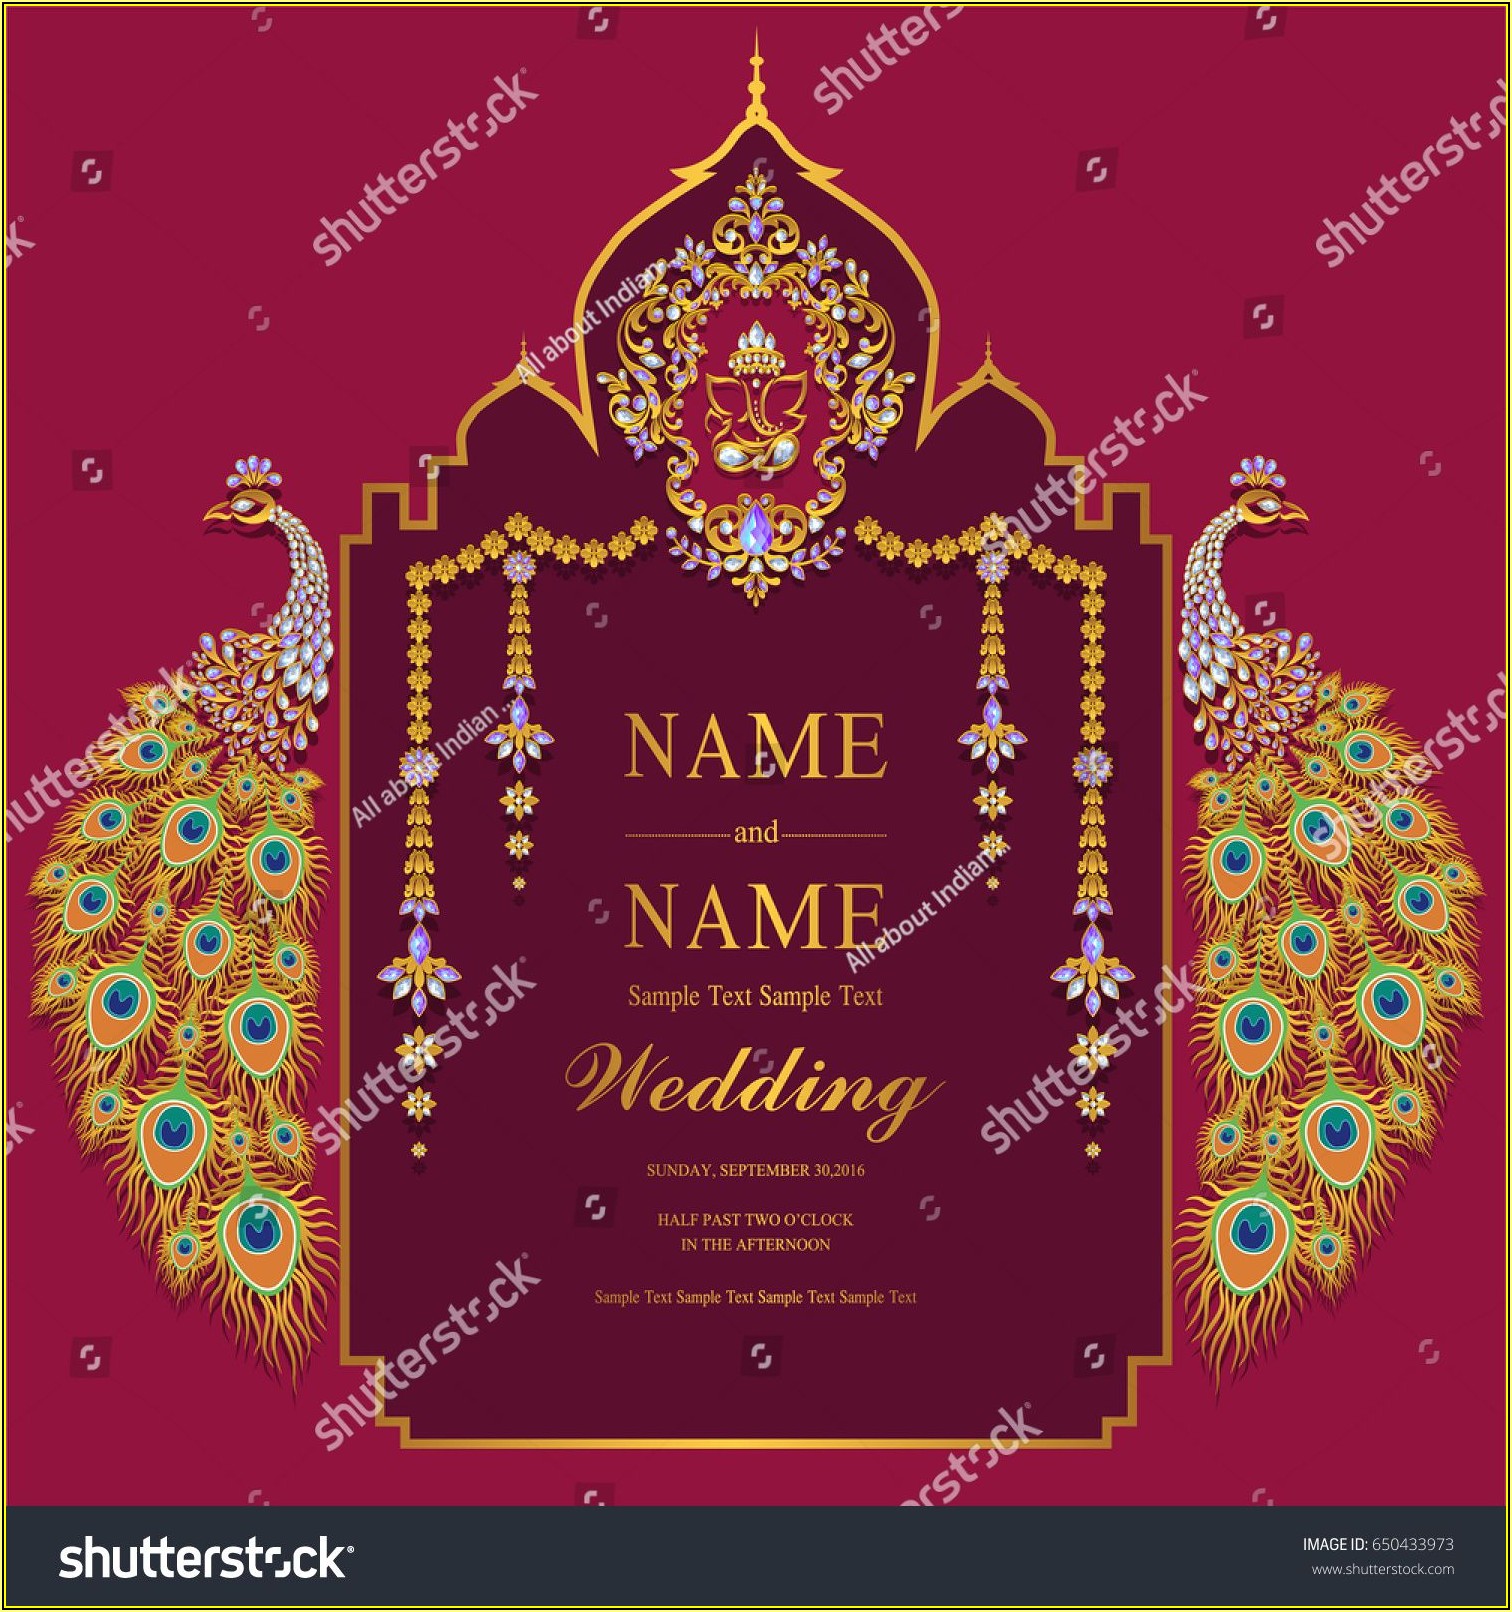 Indian Wedding Invitation Card Template With Gold Peacock Patterned And Crystals On Paper Color